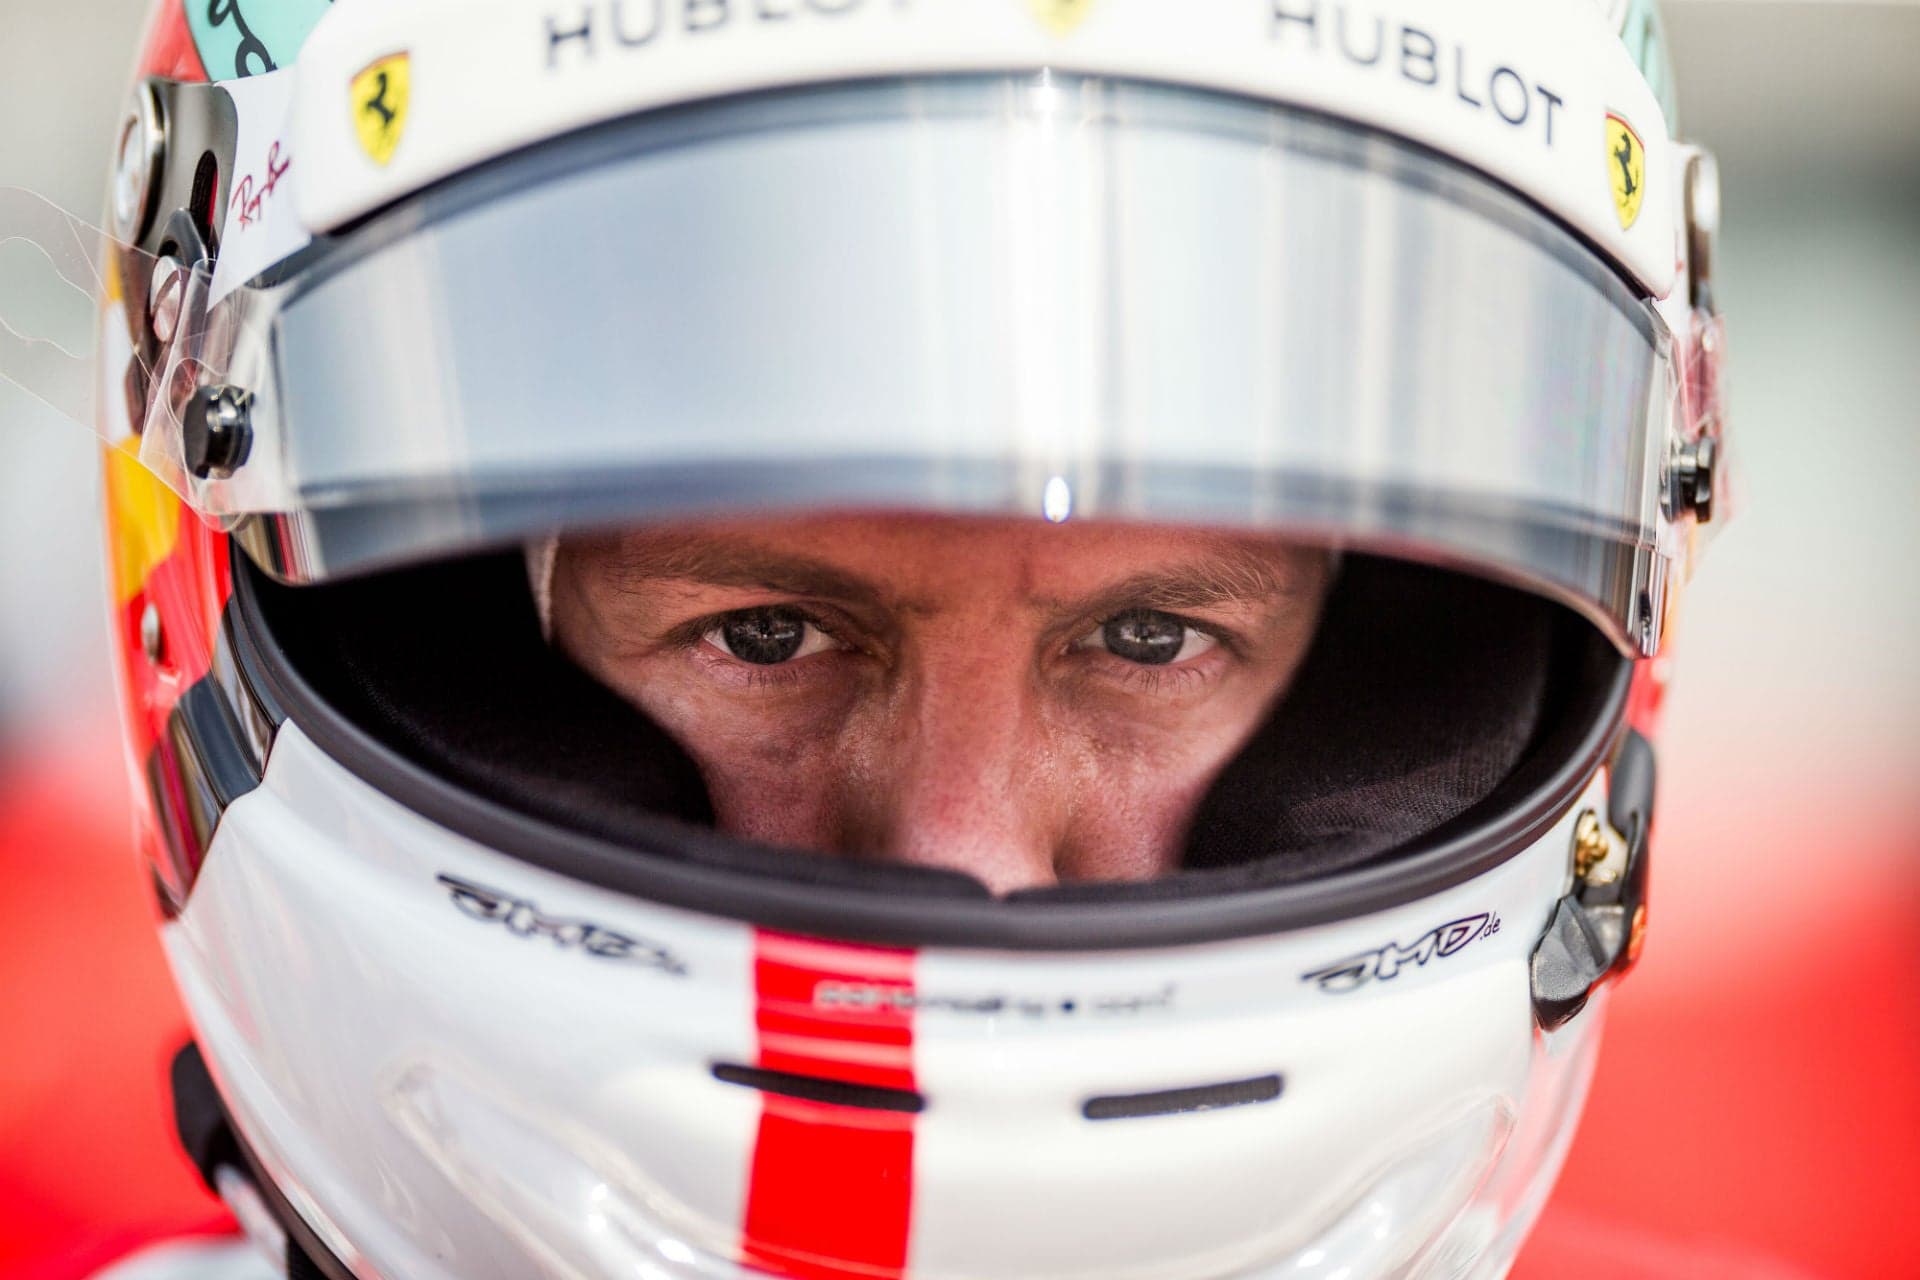 How Ferrari and Vettel’s Weekend Imploded at the German Grand Prix